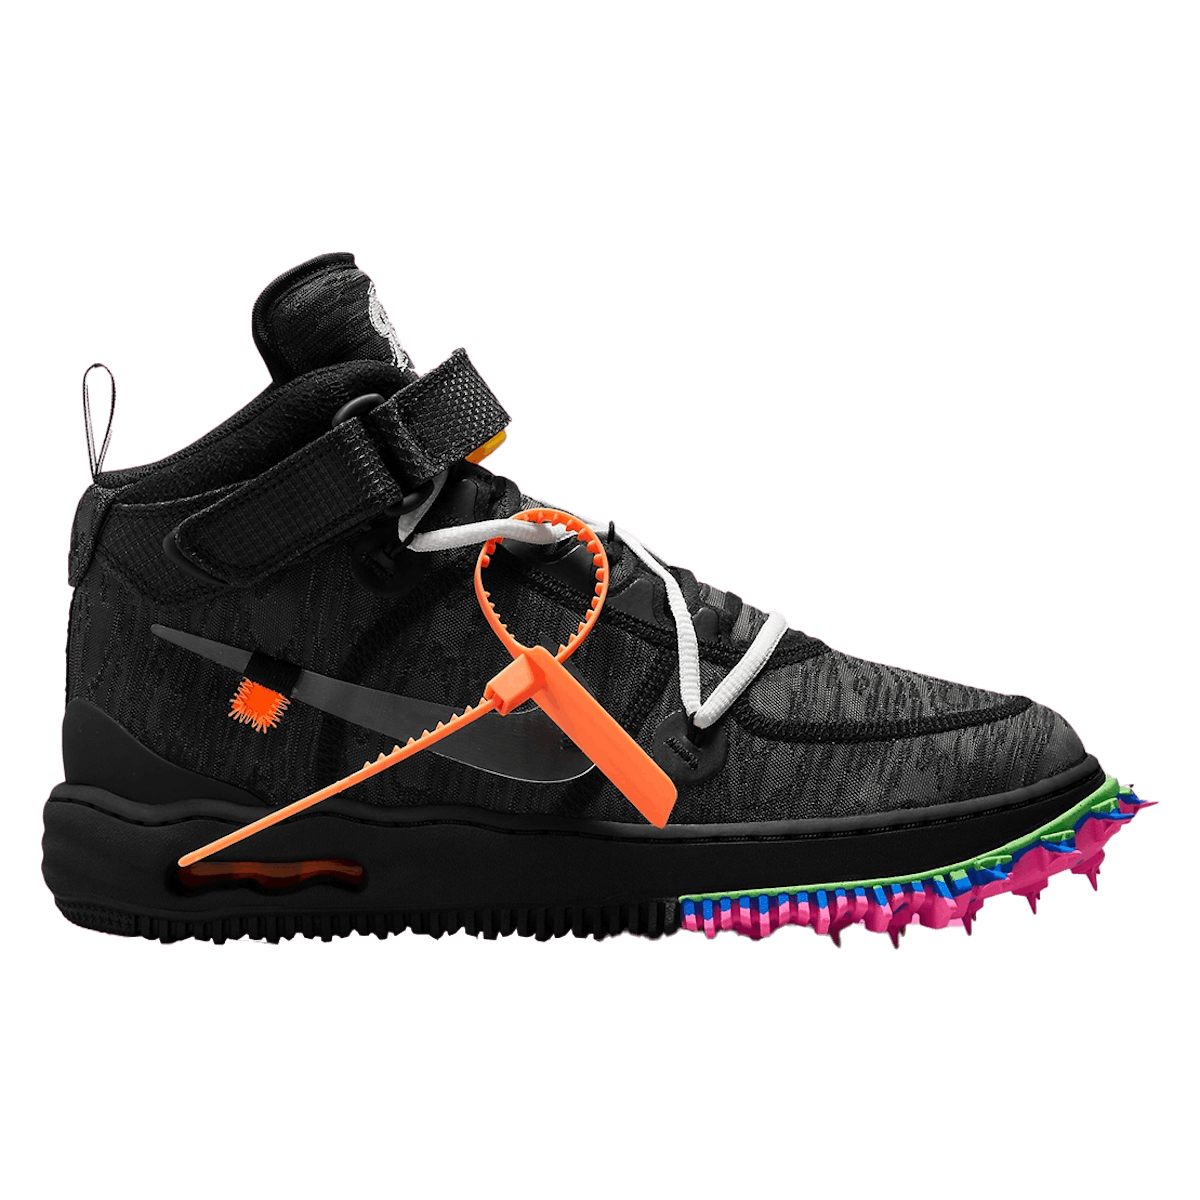 Off-White x Nike Air Force 1 Mid SP "Black"